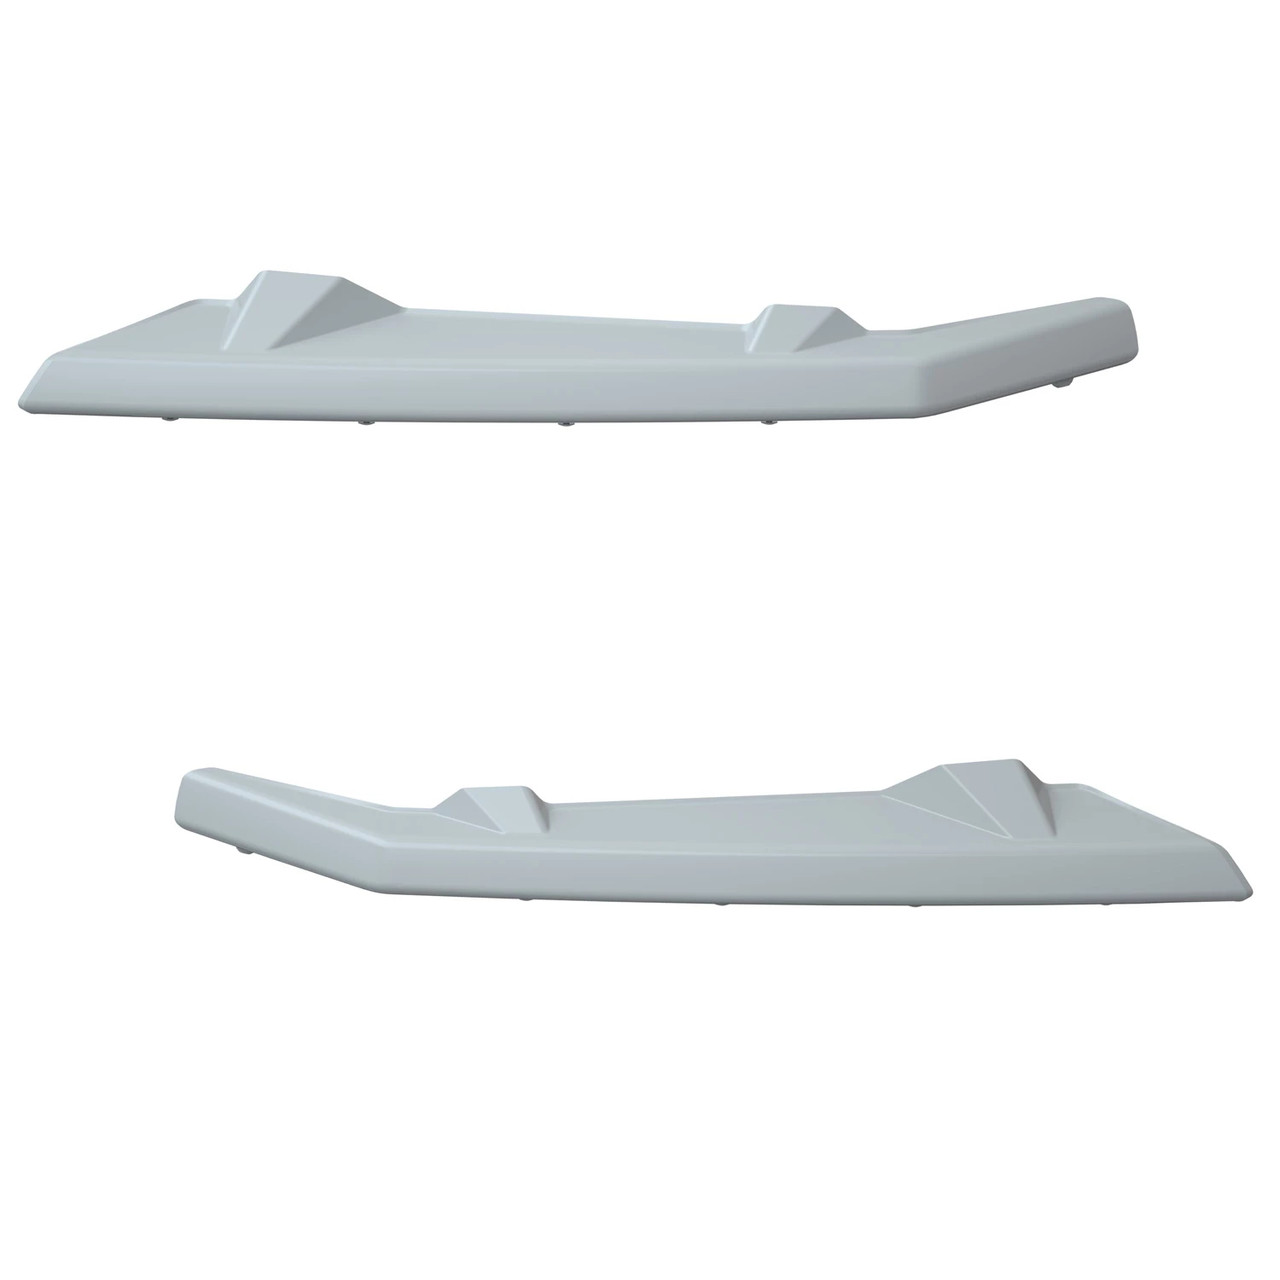 Polaris New OEM Slingshot Left and Right Front Wing Guards, 2884948-133